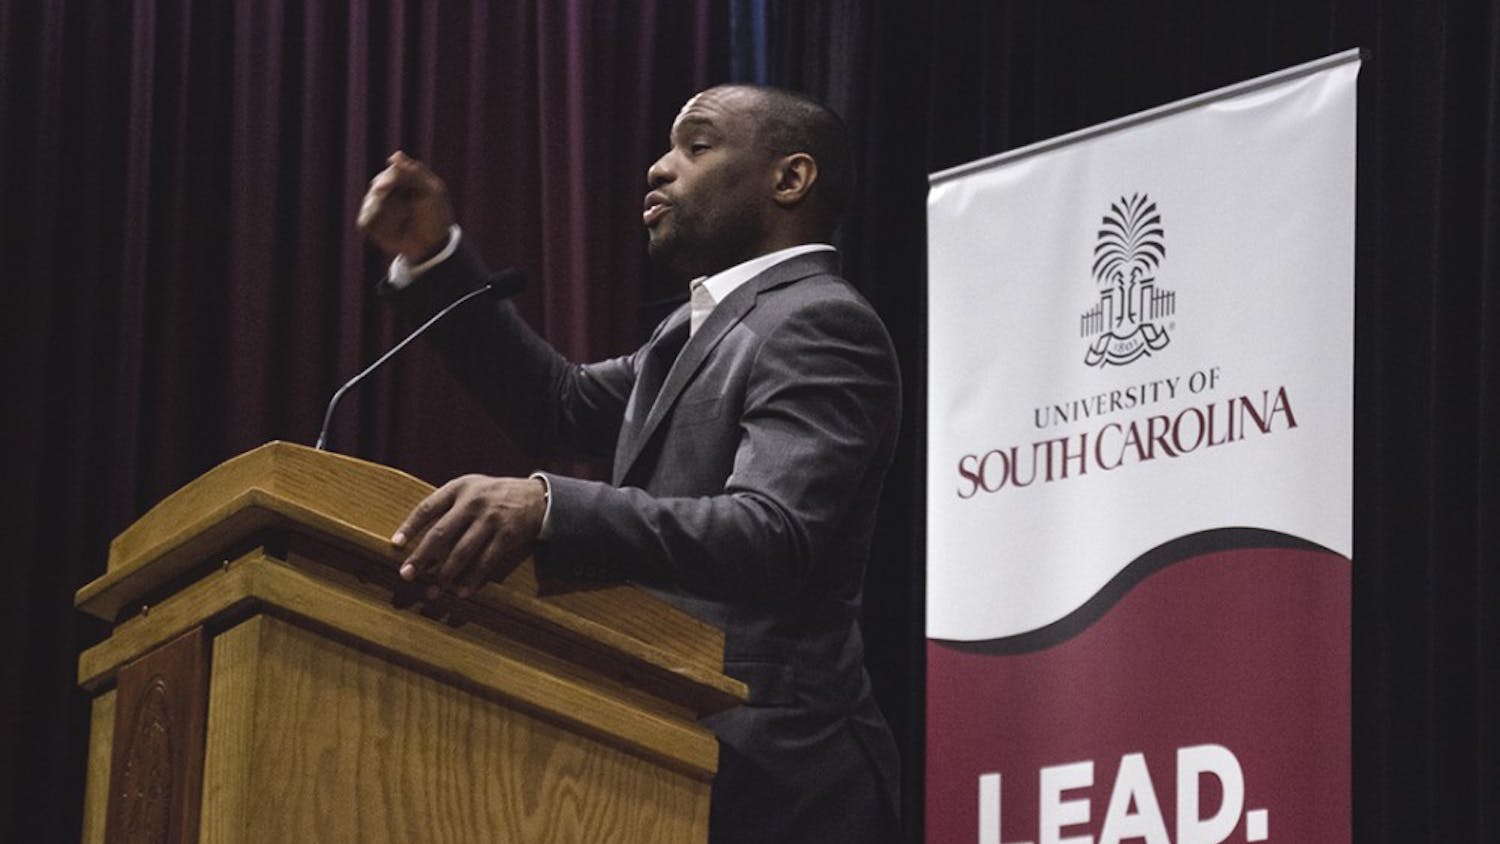 Marc Lamont Hill has worked as a professor, journalist, activist and TV host throughout his professional career.